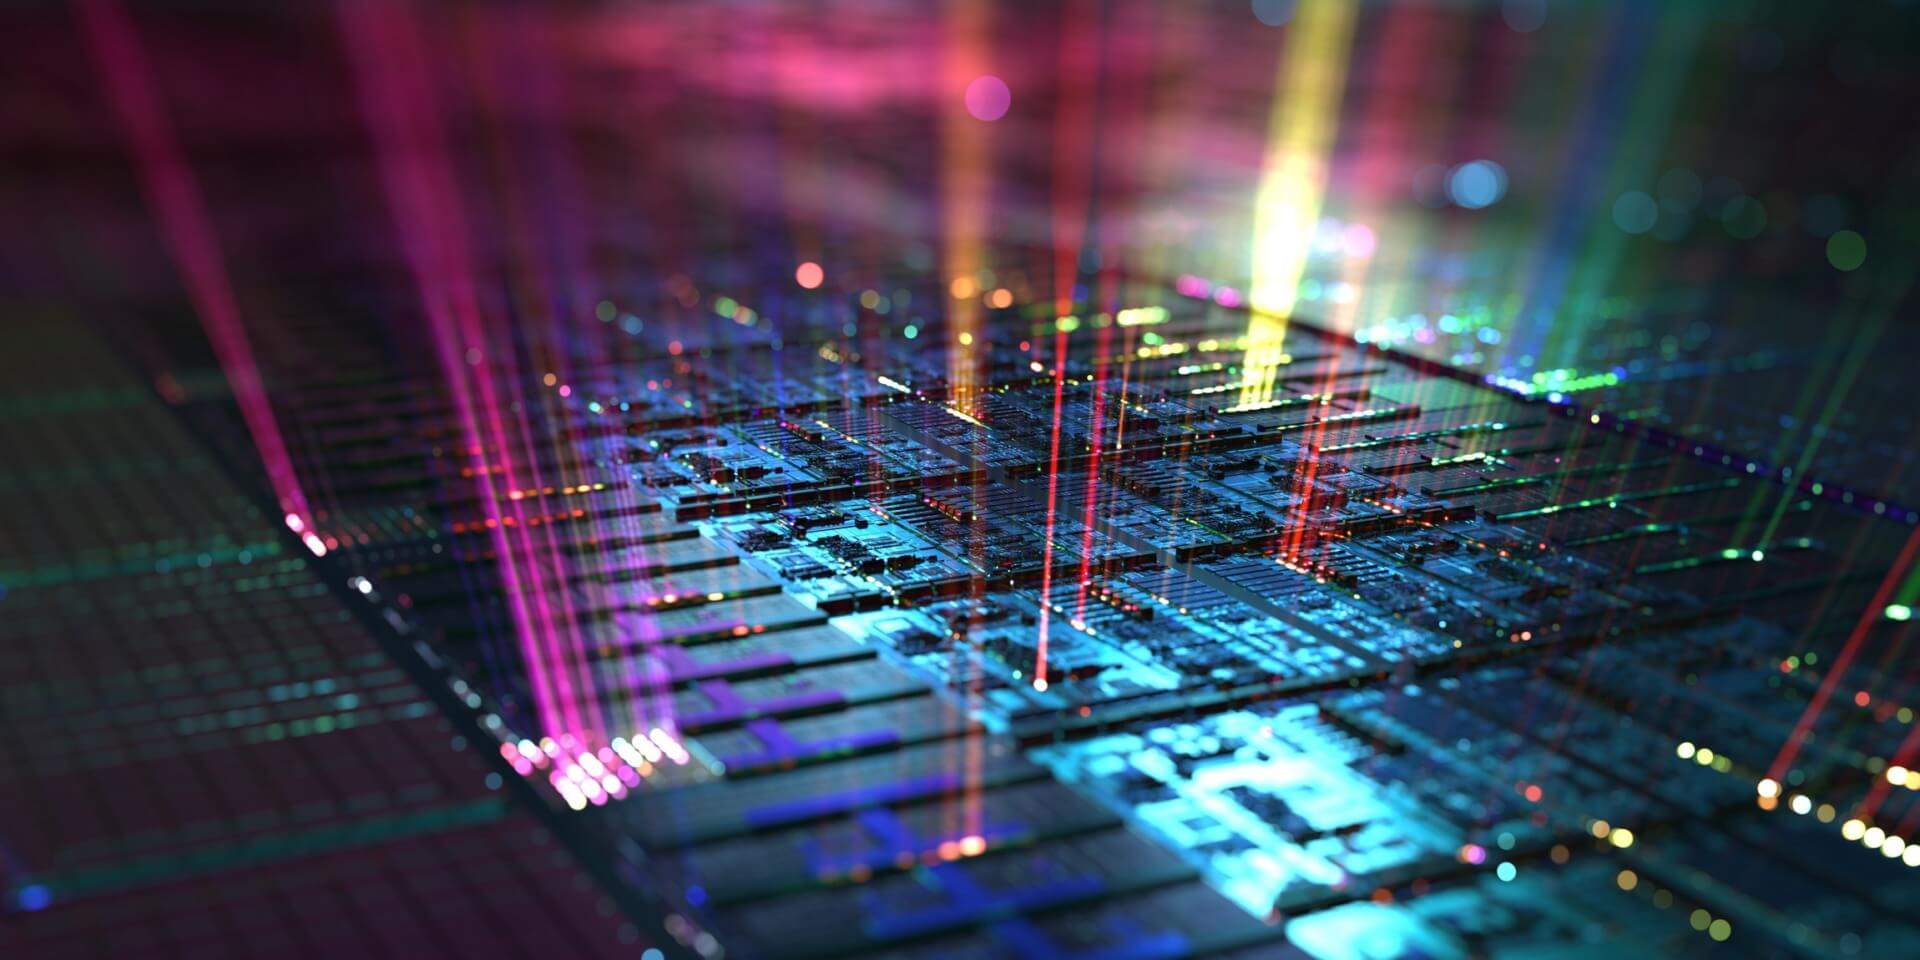 USC-Led Team Receives DARPA Grant to Develop Light-Based Computing Chips